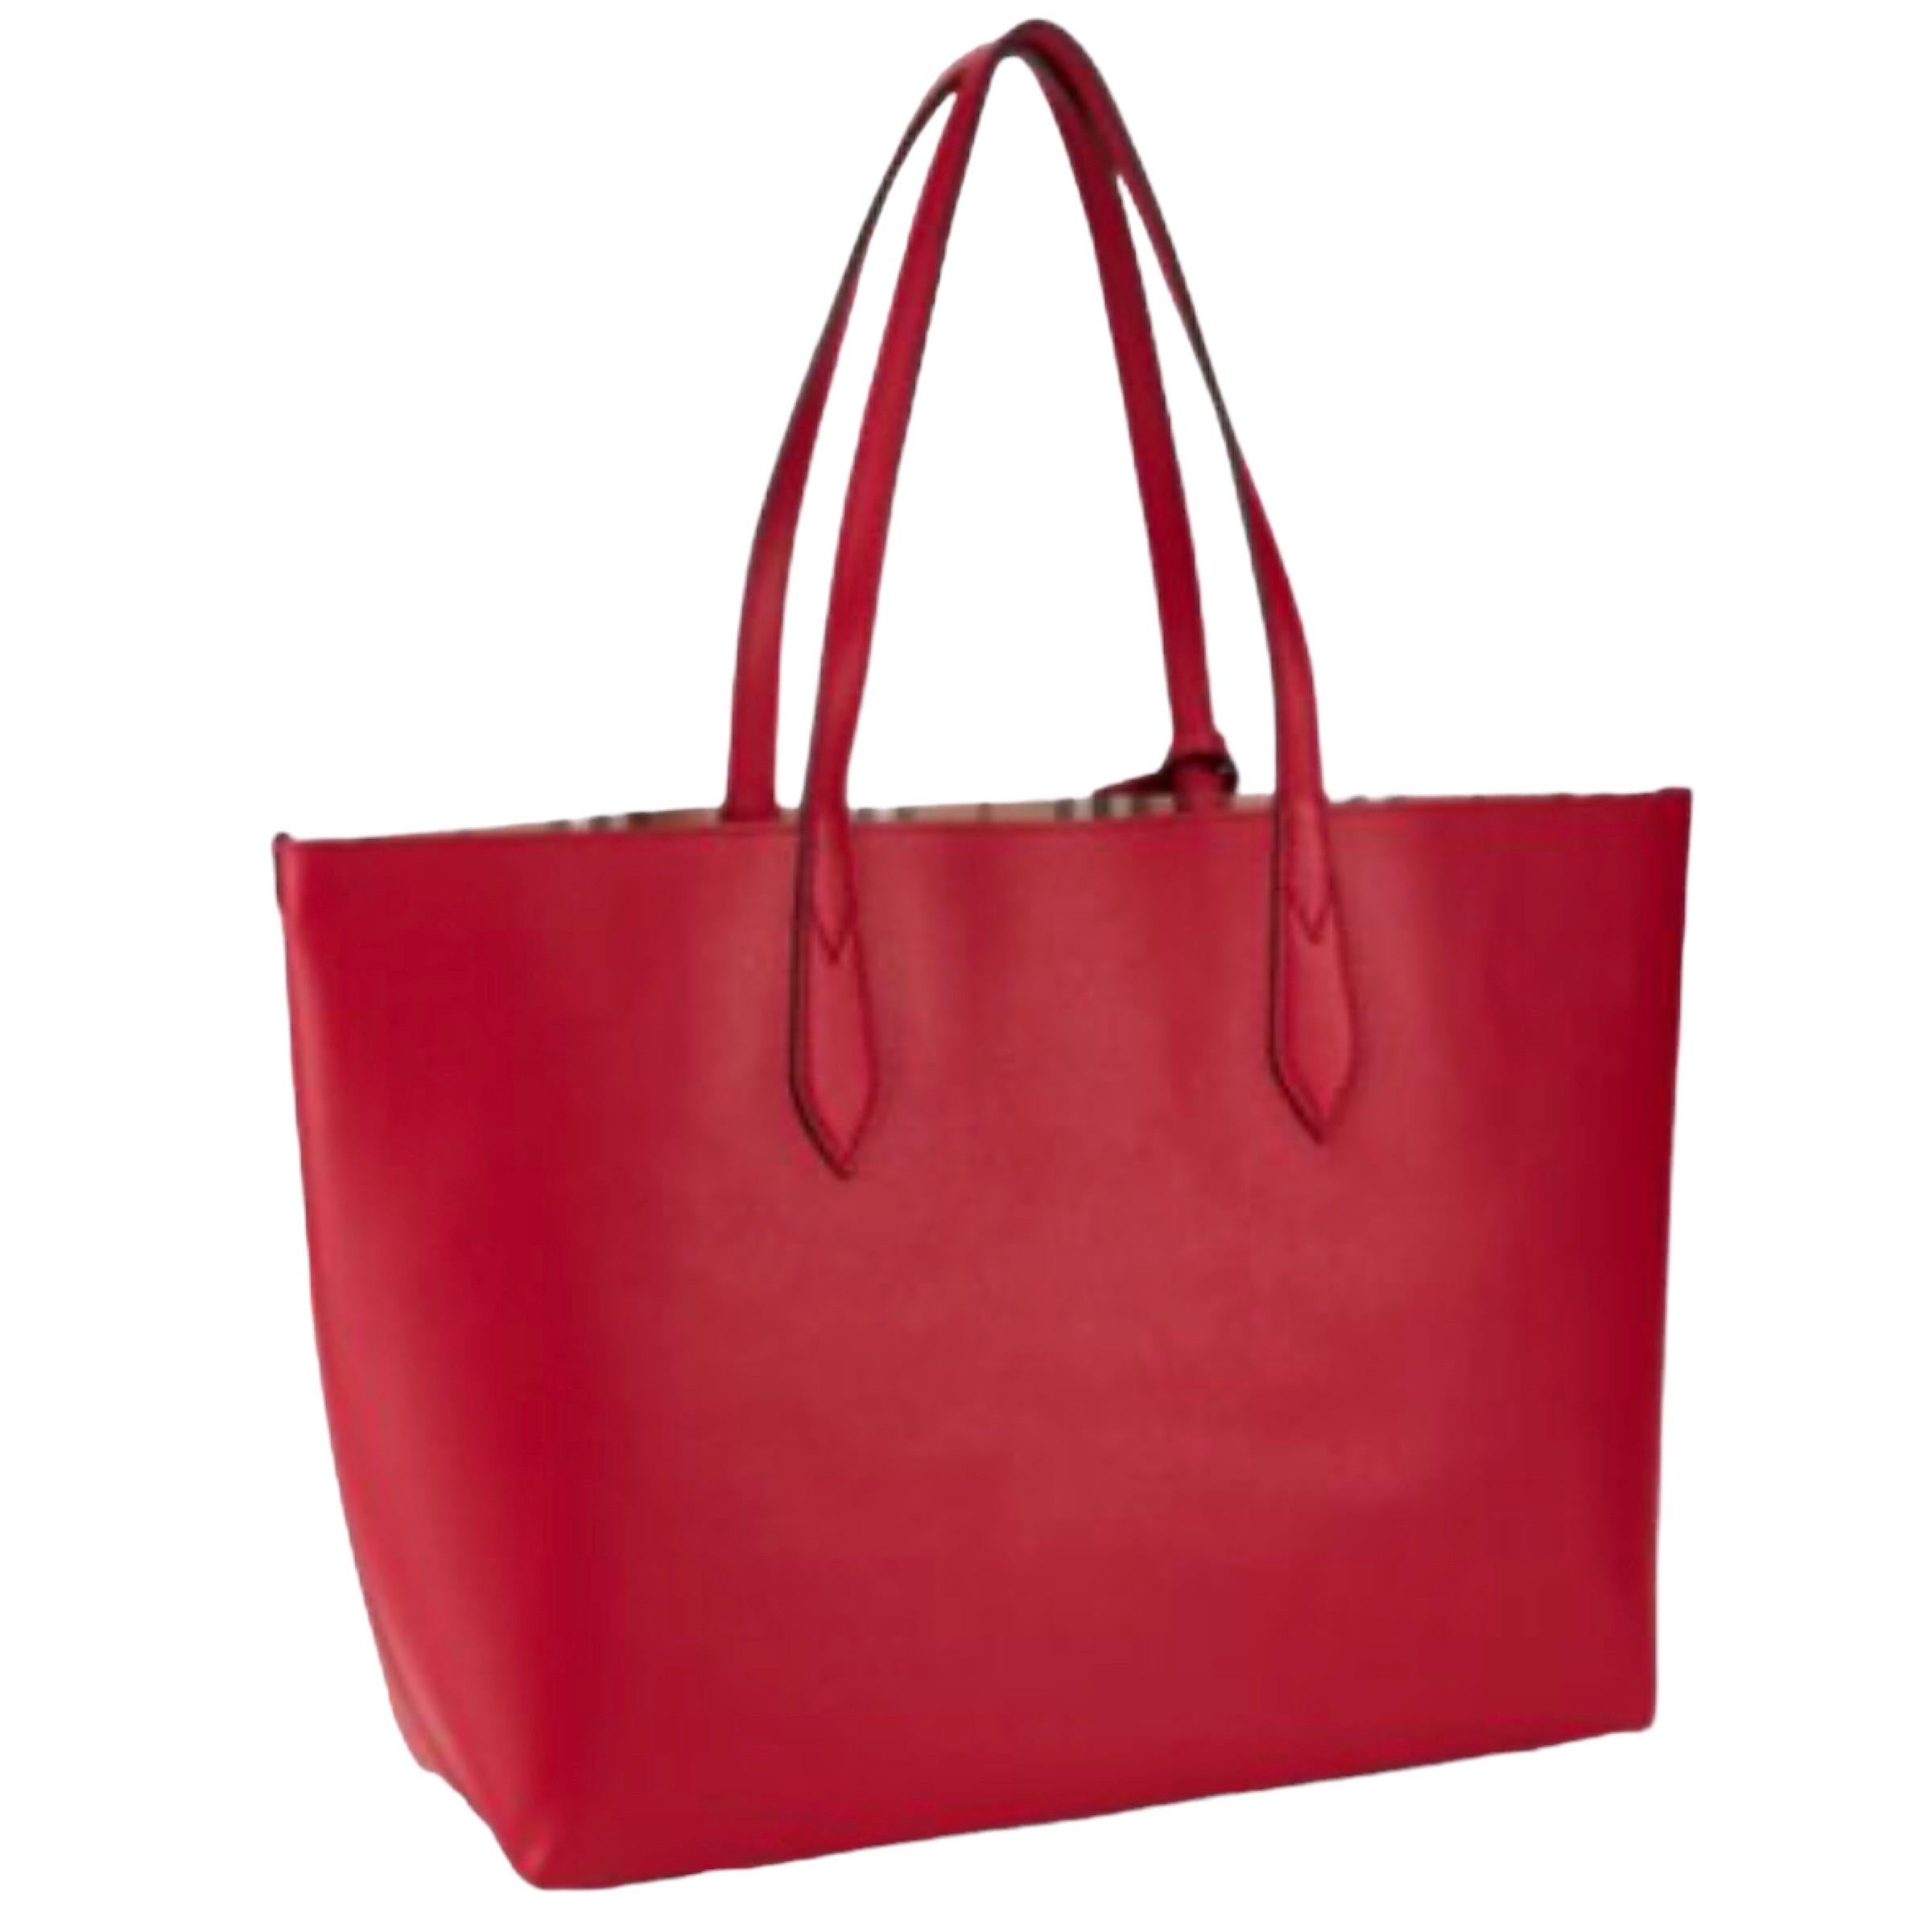 NEW Burberry Red Haymarket Check Reversible Leather Tote Shoulder Bag For Sale 7